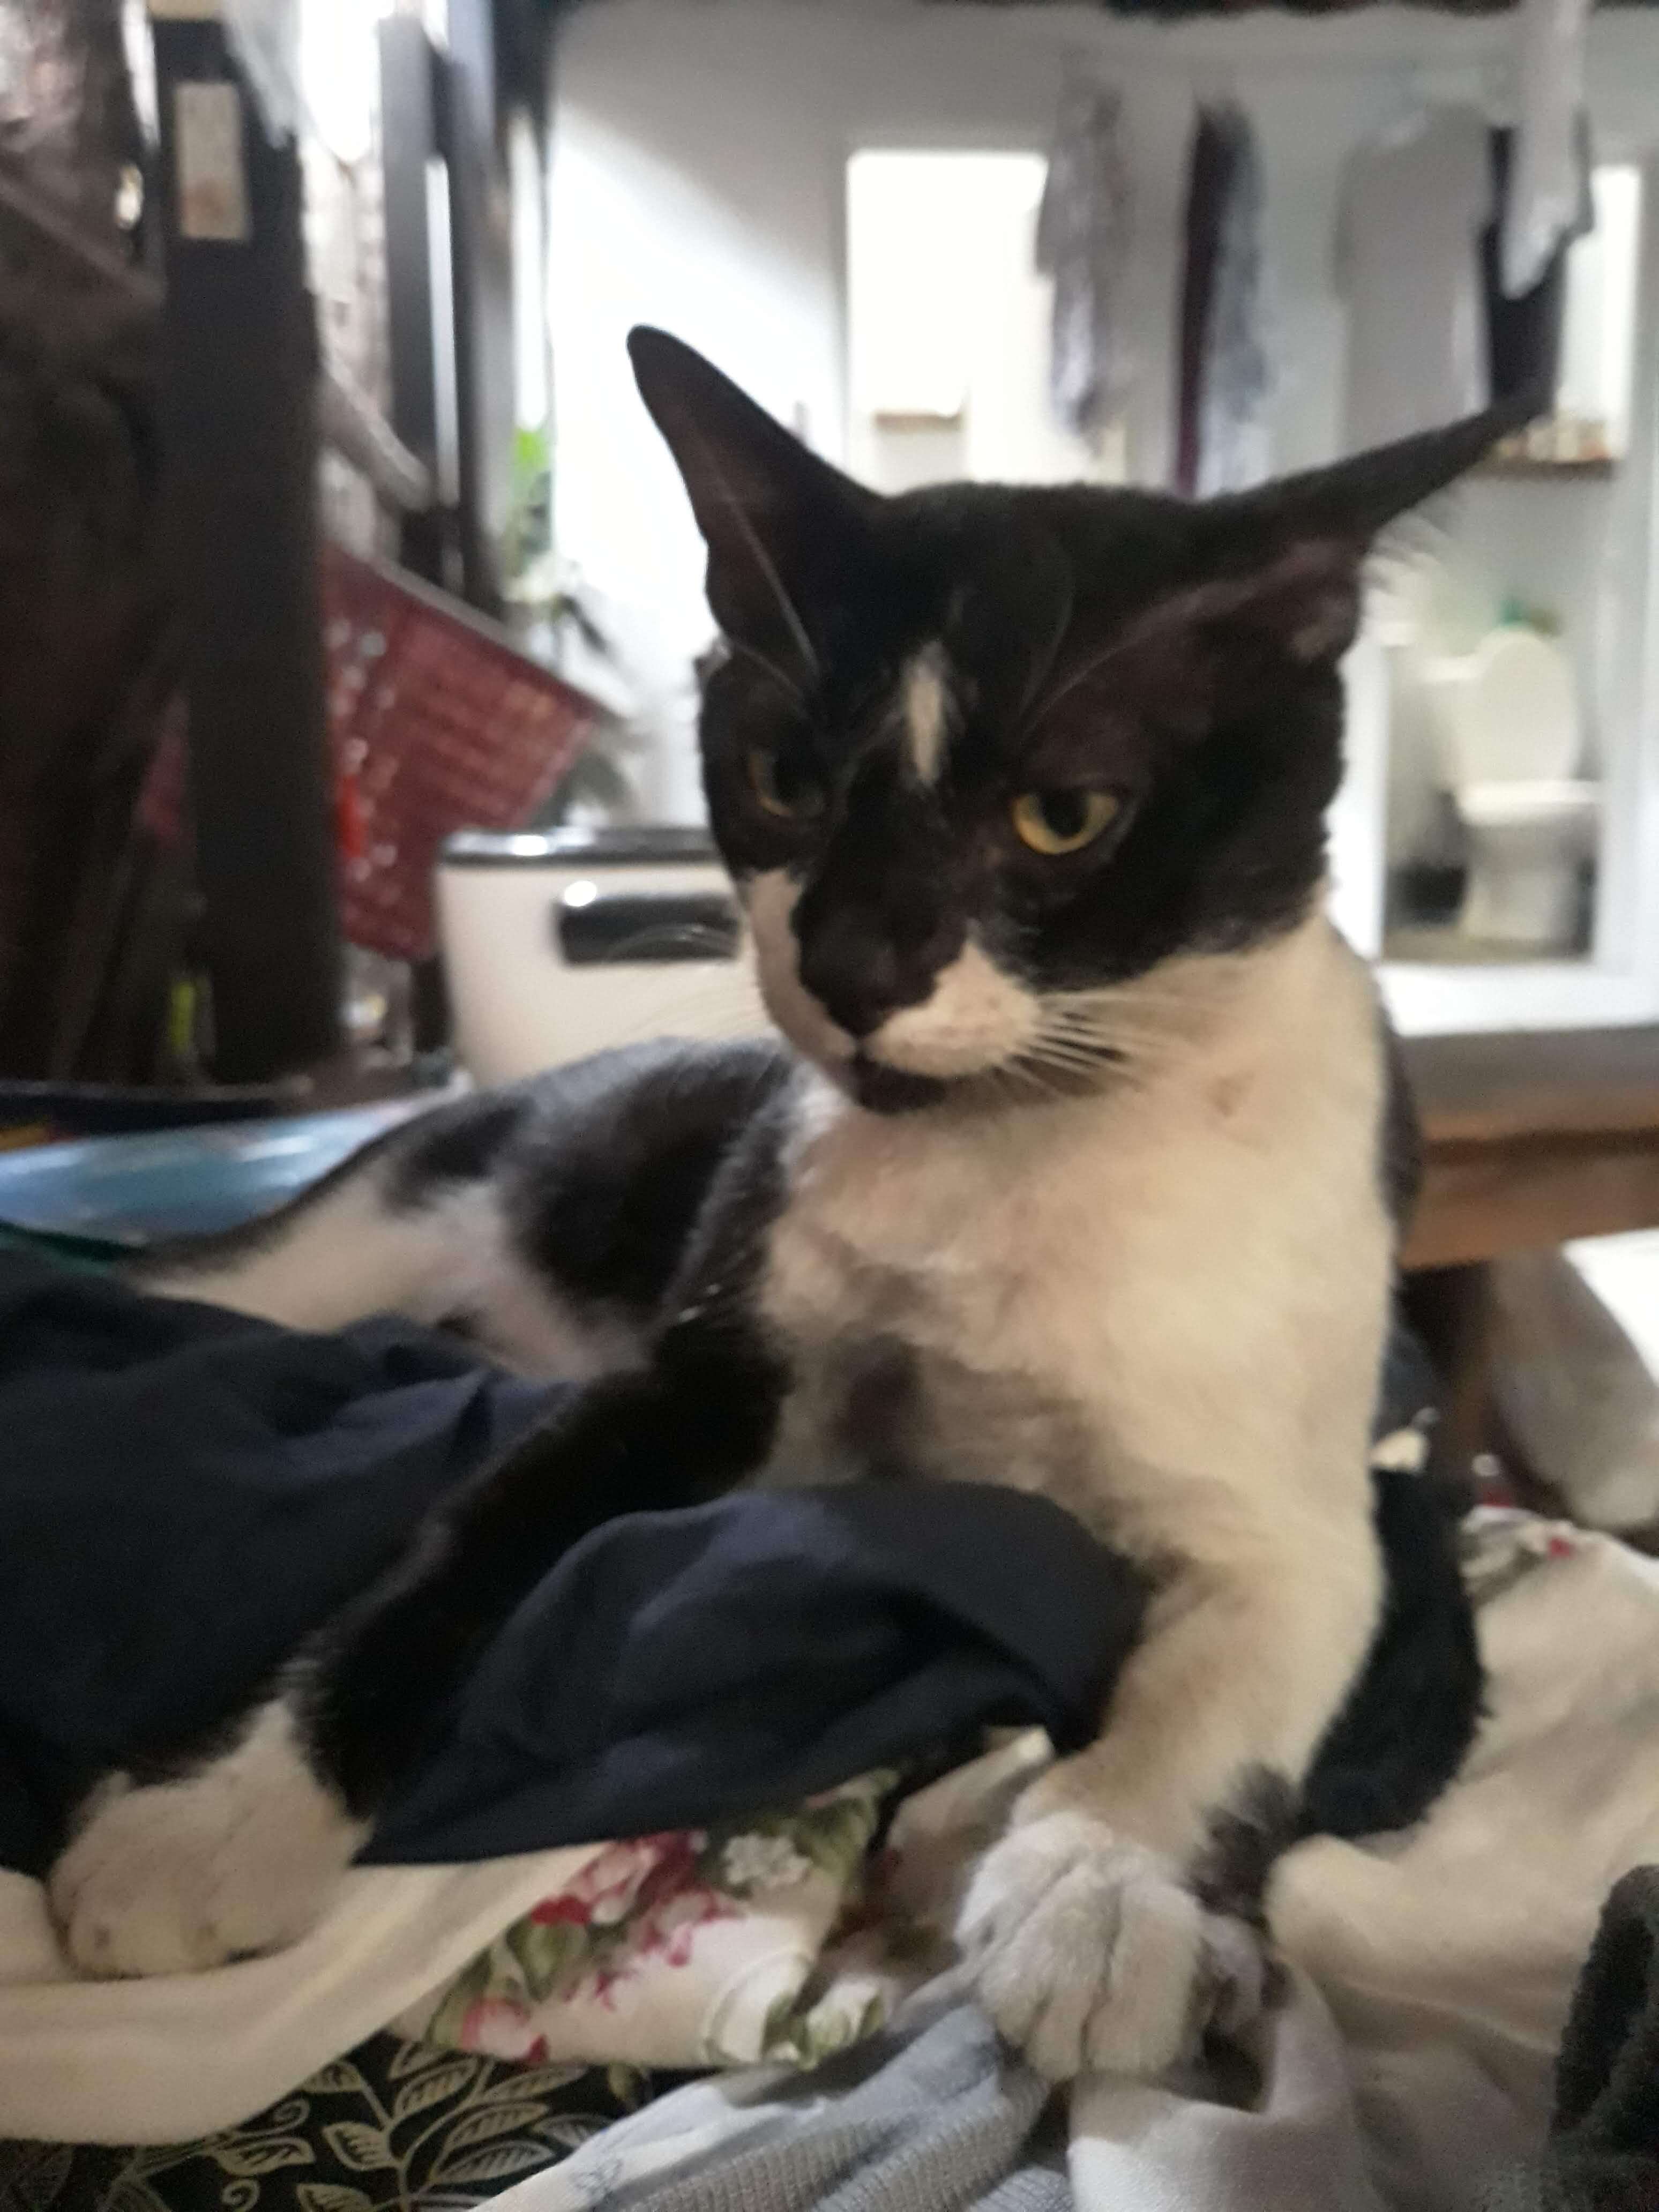 Picture of Chipiski, a mostly-black partly-white cat resting on a pile of fabrics, looking past the camera